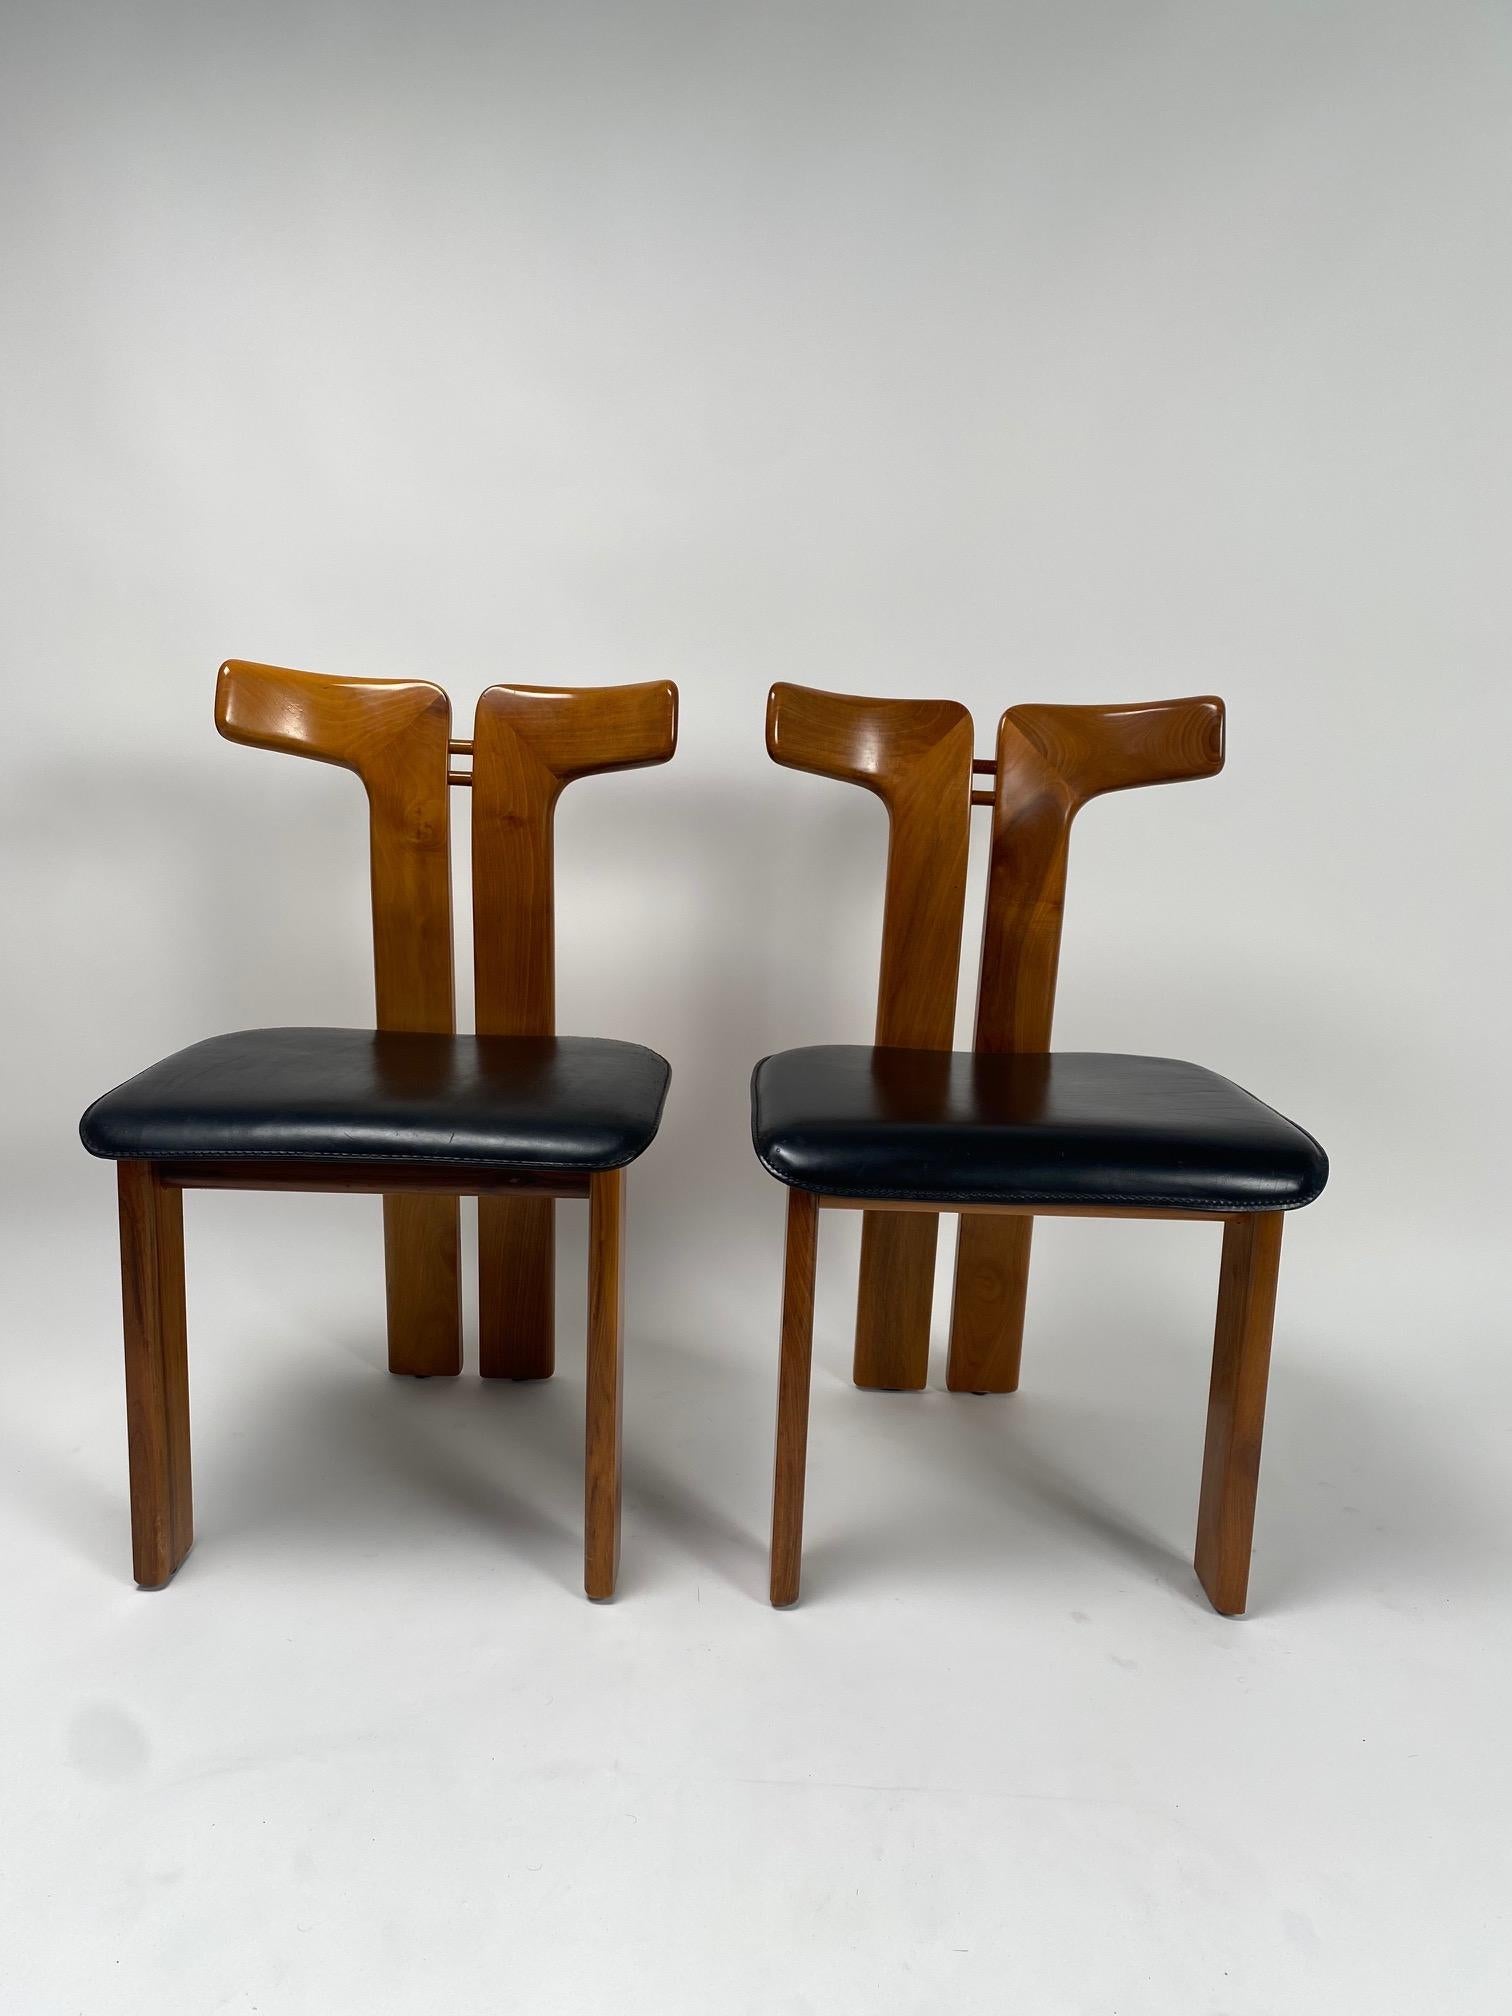 Pierre Cardin, 4 Dining Chairs in Walnut and Leather, 1970s 4